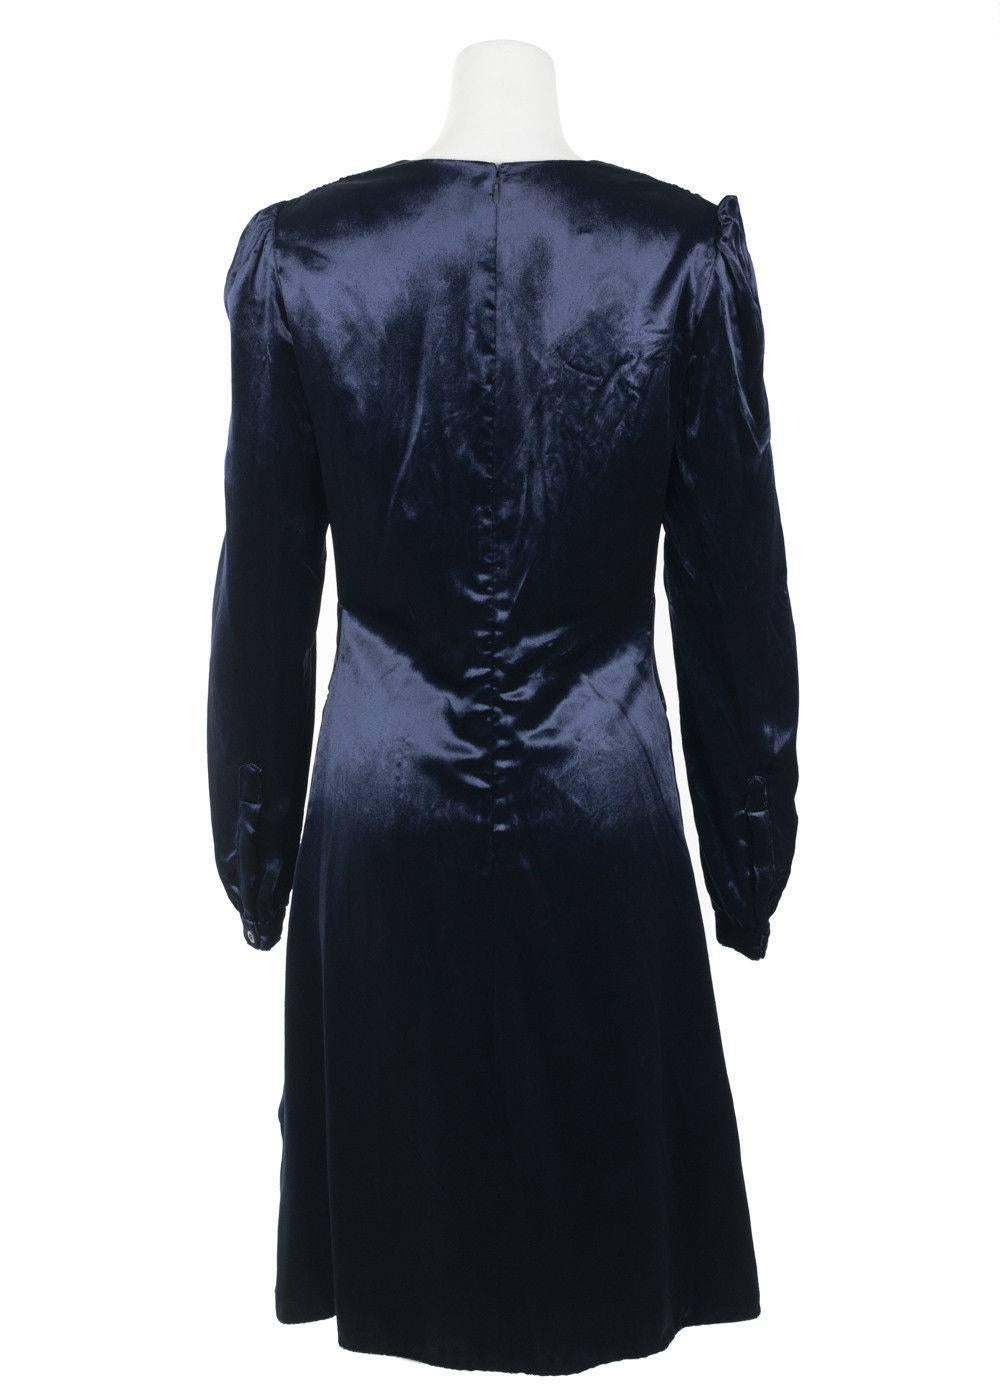 Brand New Prada Womens Long Sleeve Velvet Dress
Original Tag
Retails in Stores & Online for $2060
Women's Size EUR 44/ US 6 Fits True to Size

Dress yourself for the occasion in your Delicate Velvet Prada Dress. This smooth navy blue creation